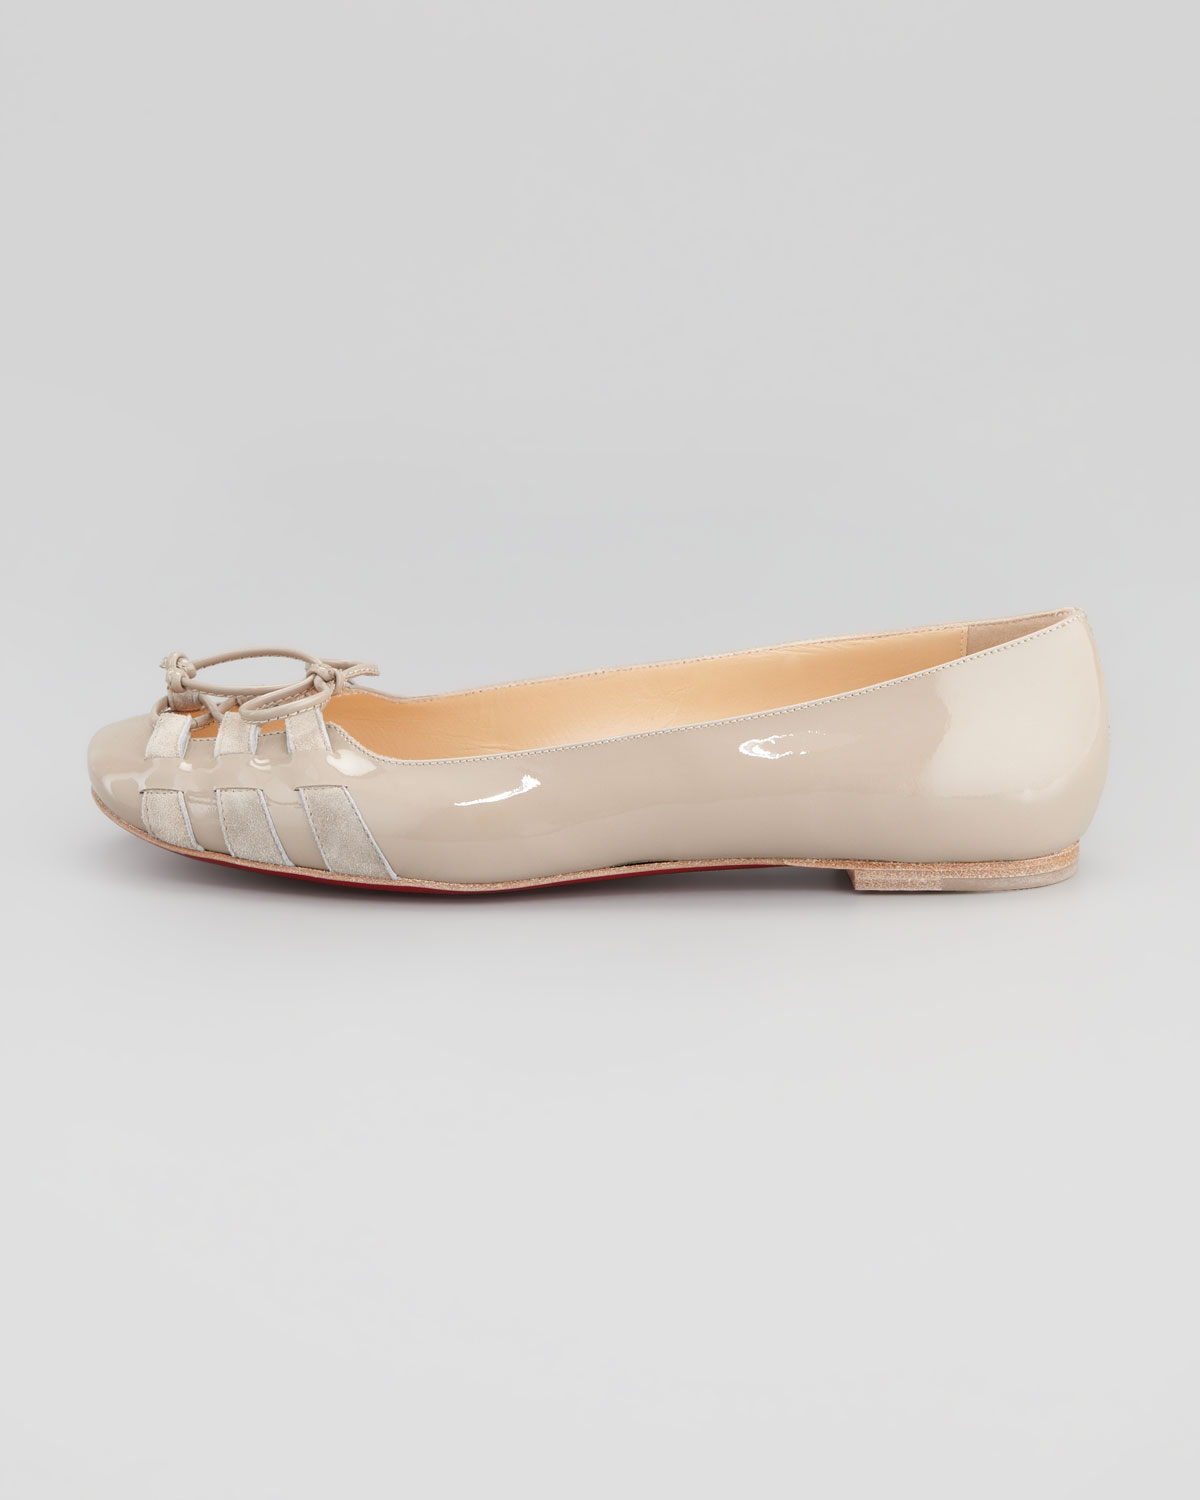 christian louboutin cork flats Beige white patent leather details ...  